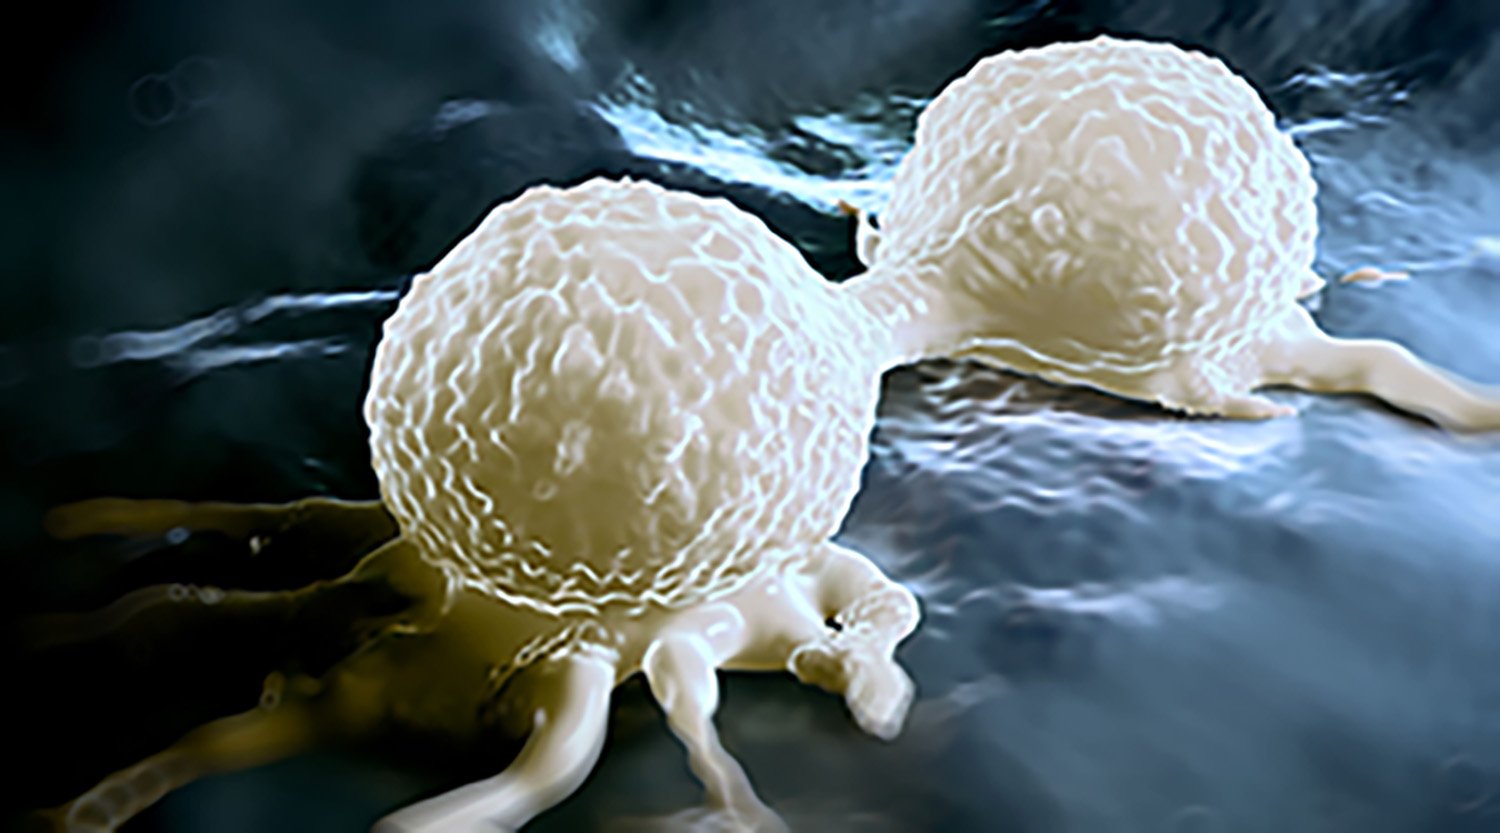 Triple-Negative Breast Cancer (TNBC) cells interacting in the tumor microenvironment.